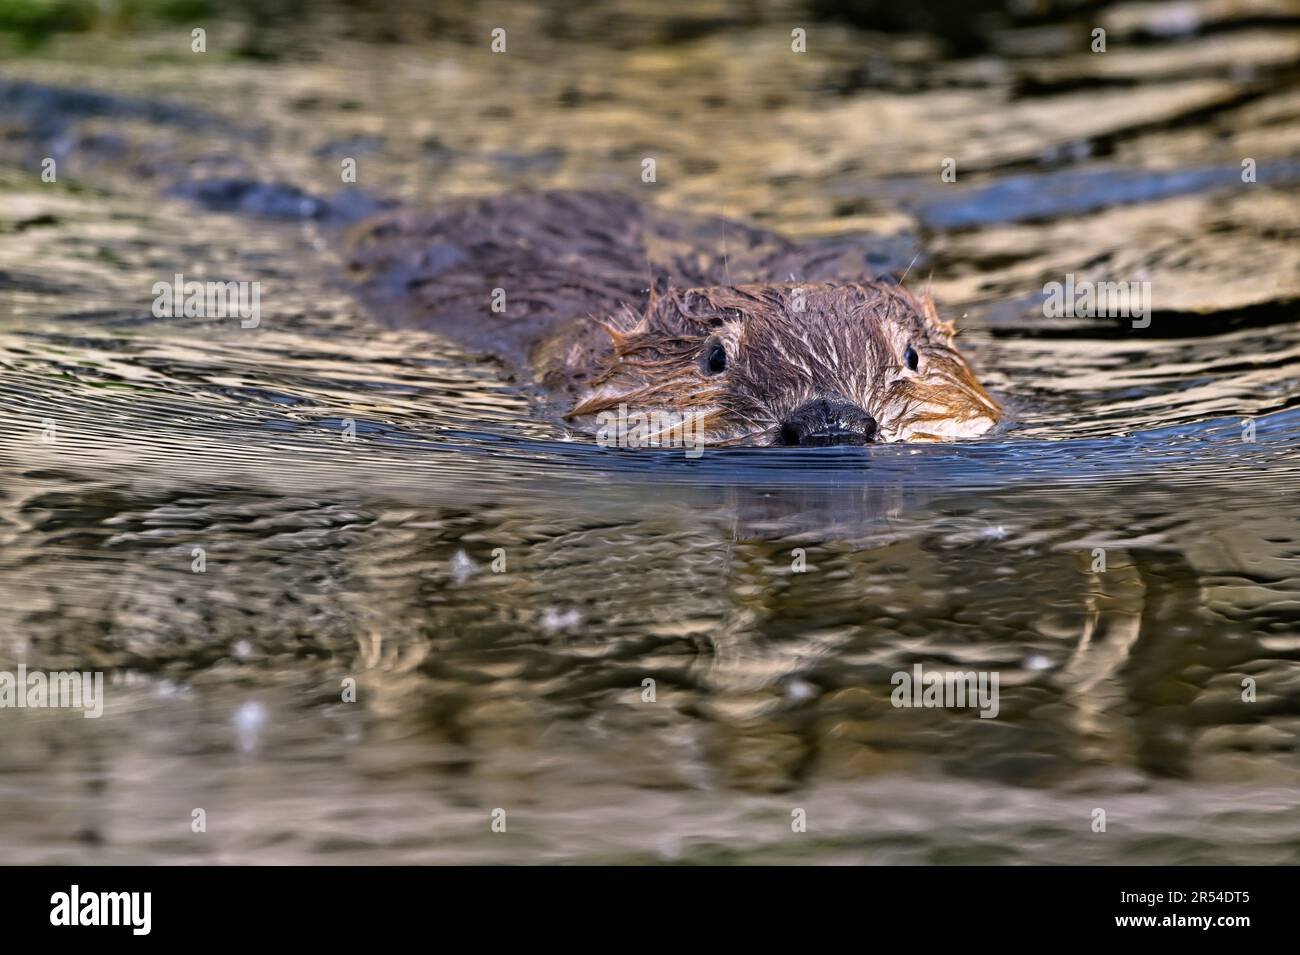 A close up image of a wild beaver, Castor canadensis, swimming in the reflective light of his beaver pond. Stock Photo